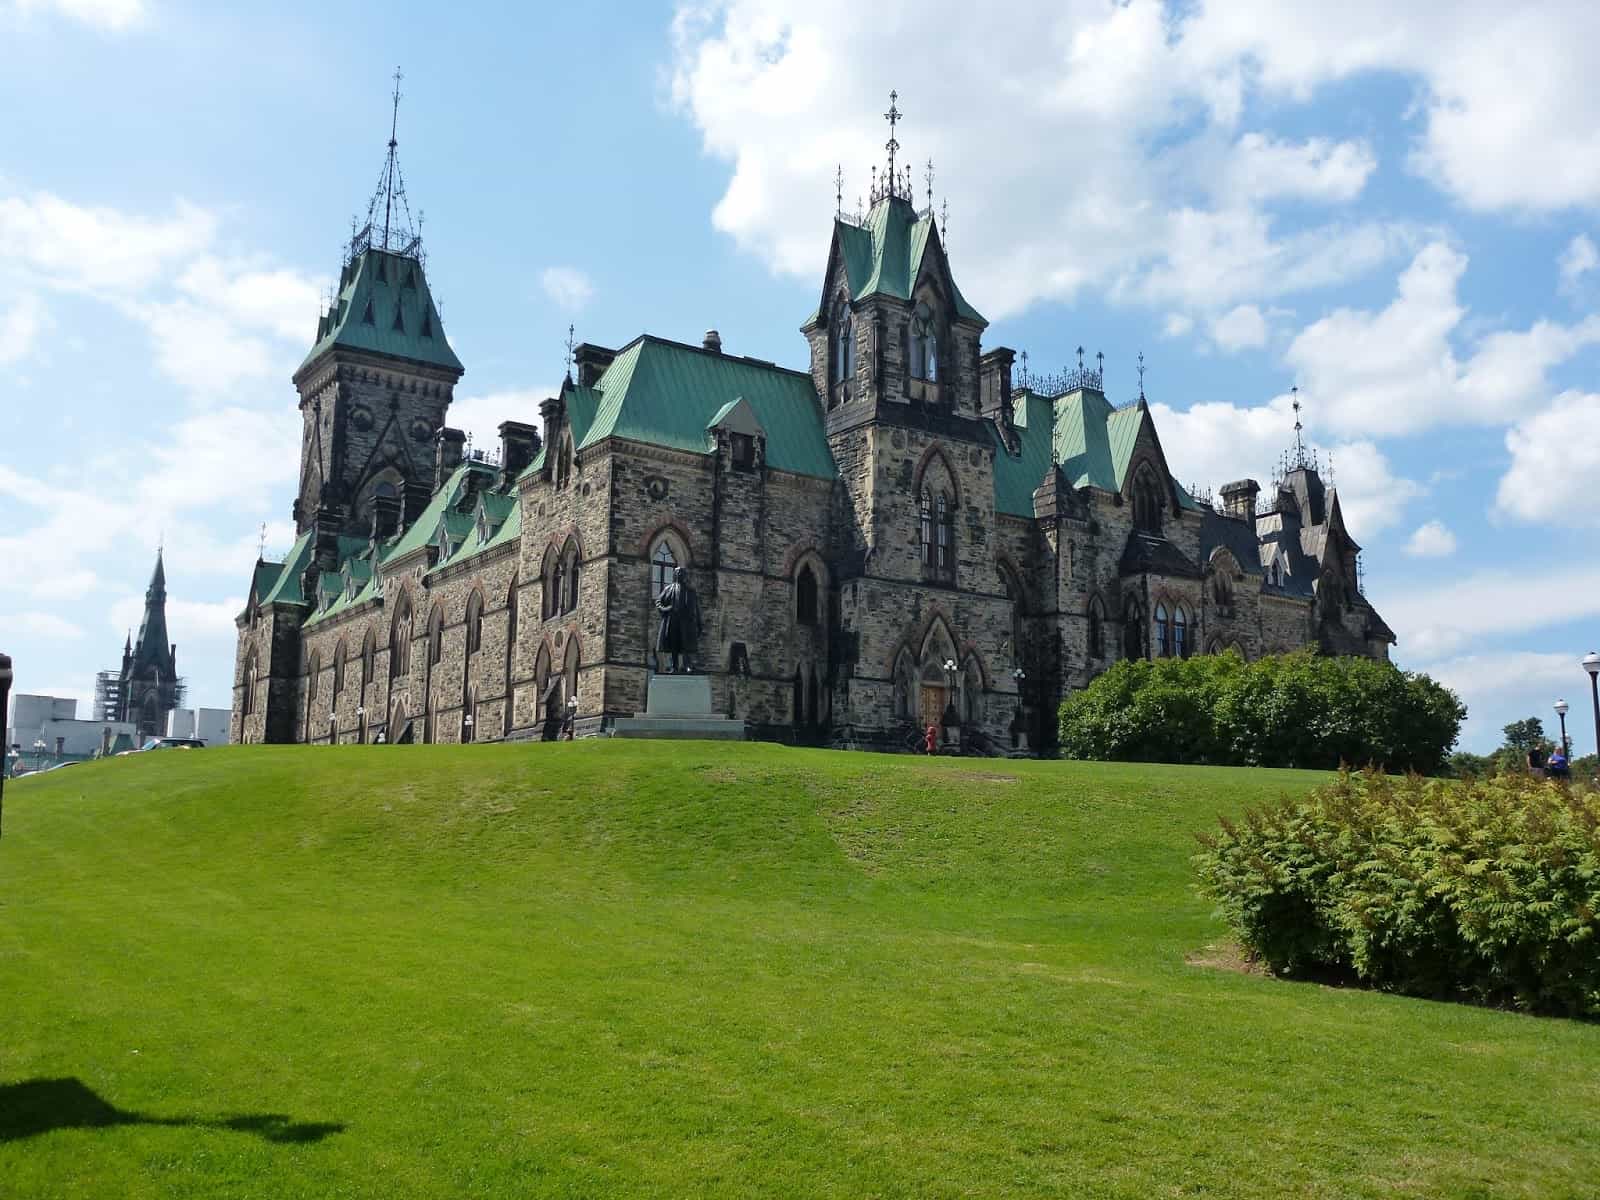 East Block at Parliament Hill in Ottawa, Ontario, Canada